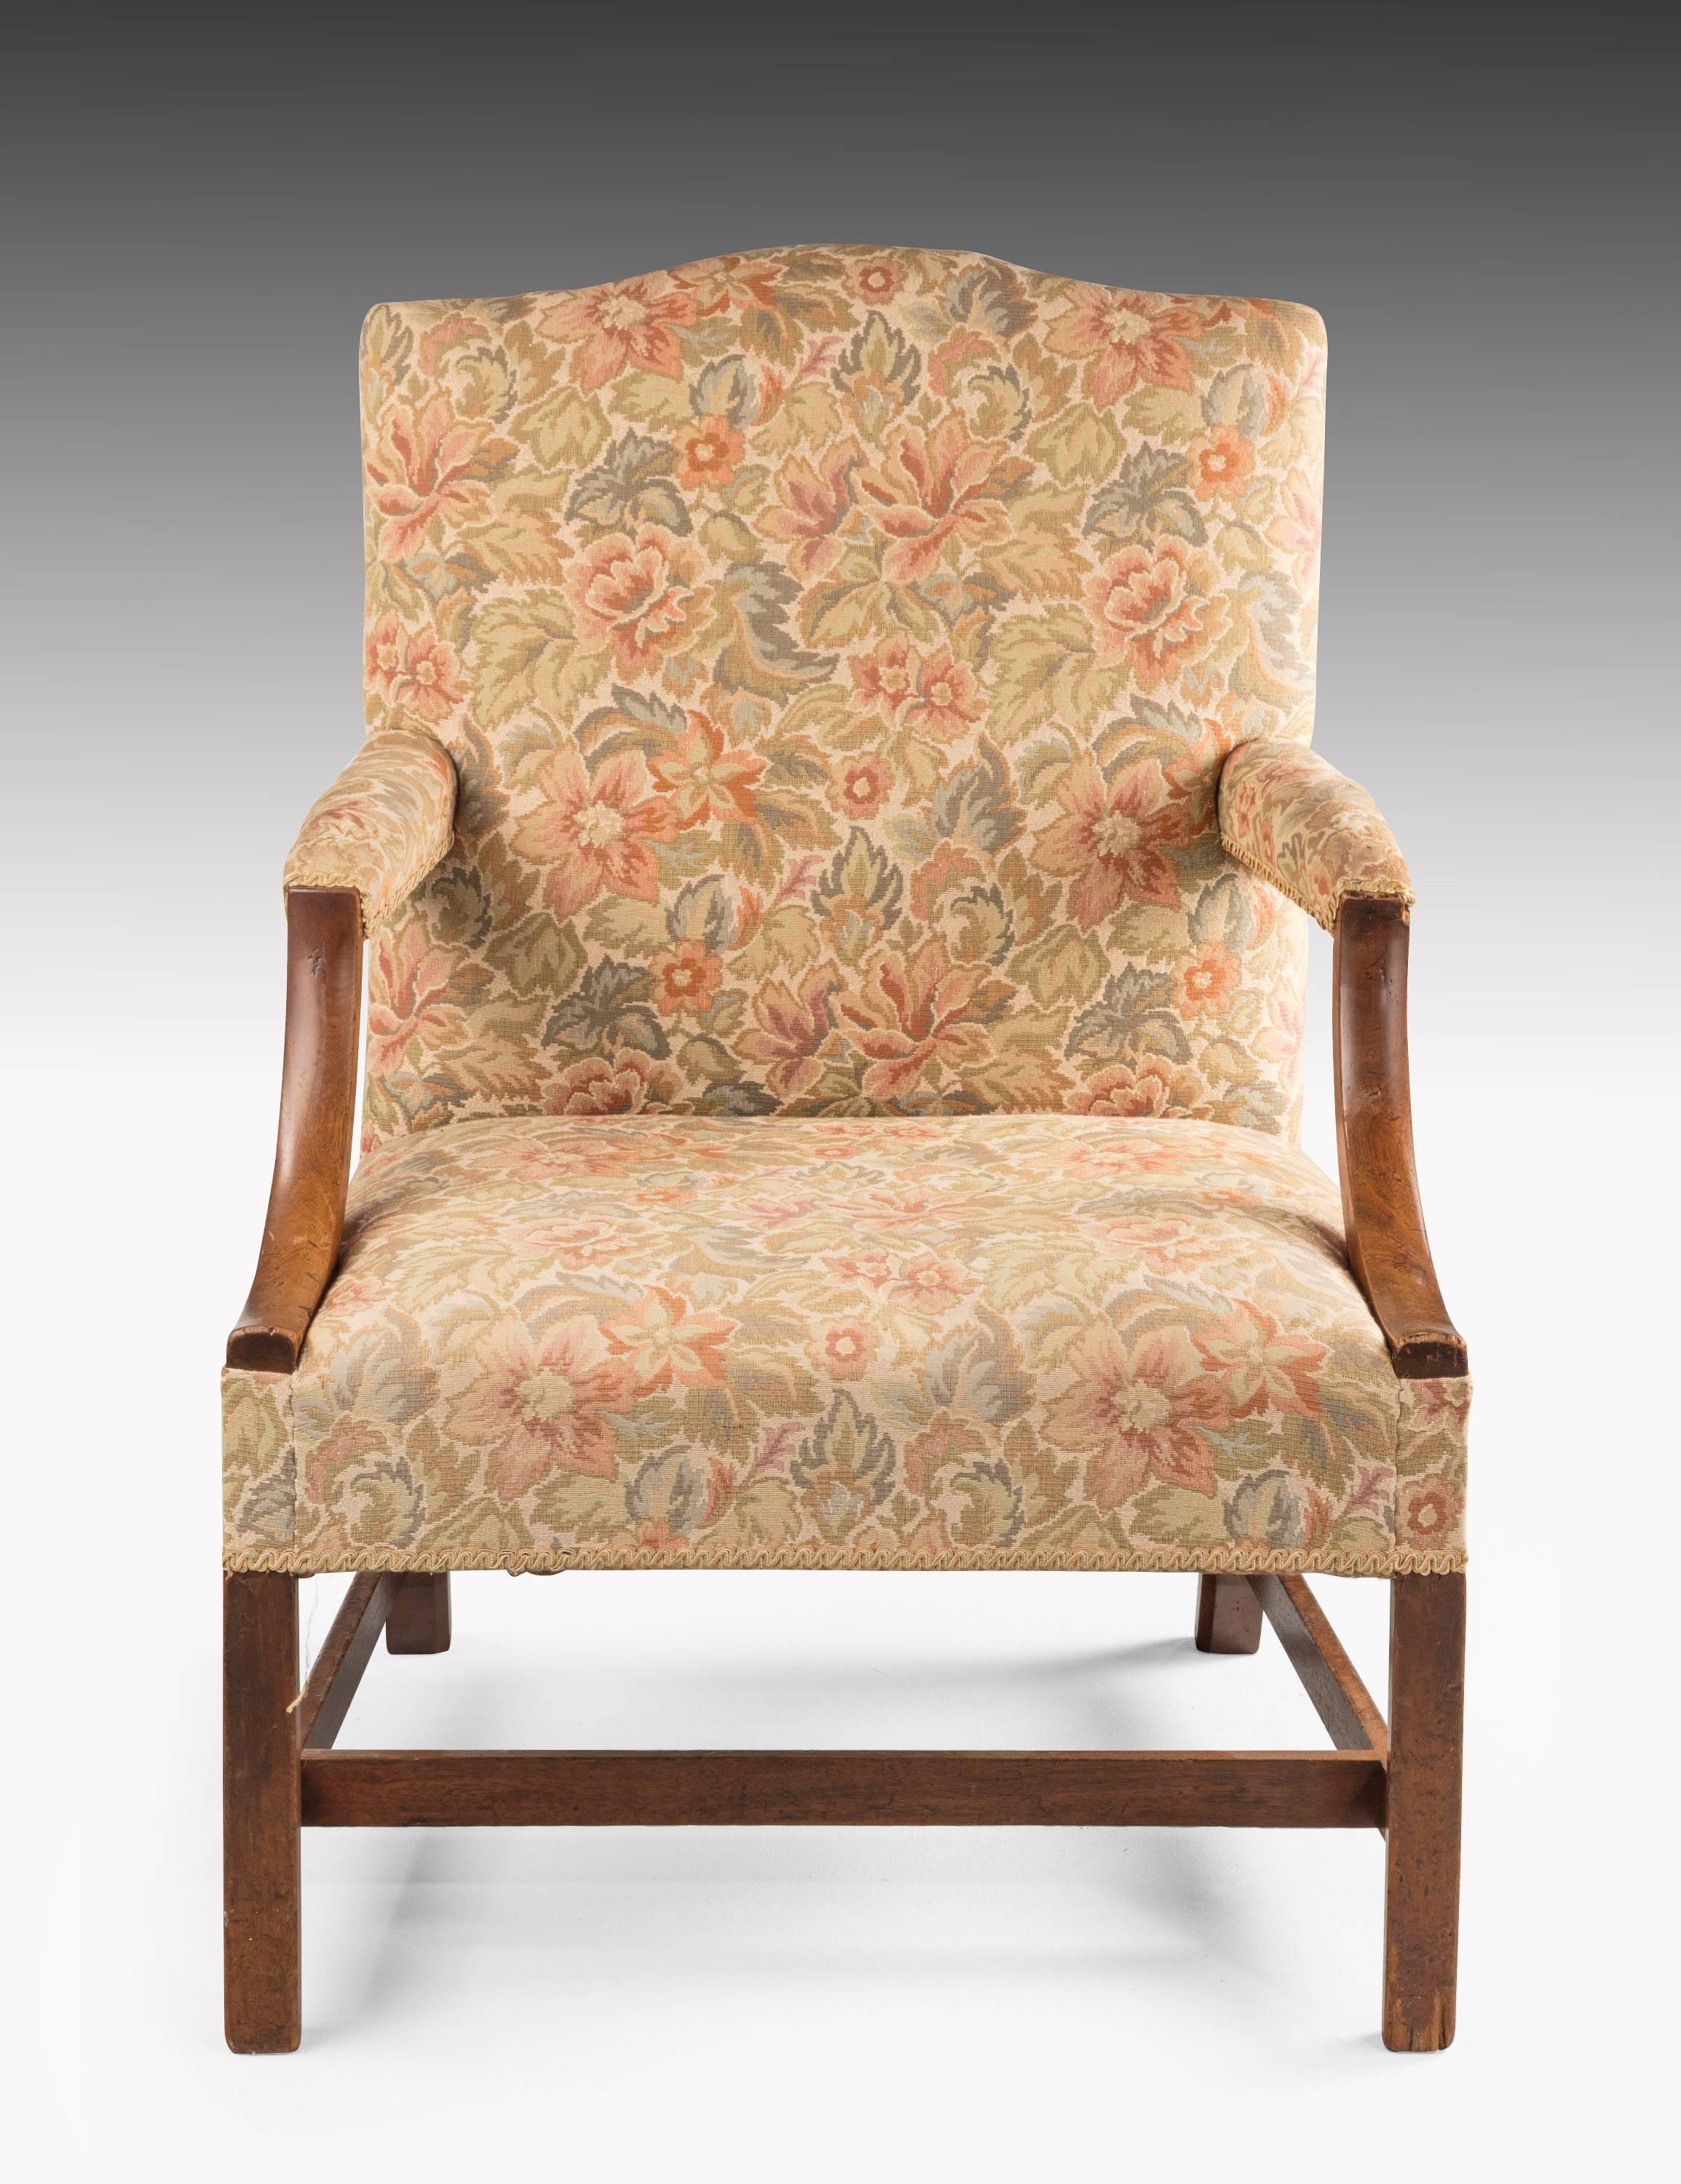 George III period mahogany Gainsborough armchair with strong square supports joined by an H stretcher. Swept arms of very good color and patina.

Seat height 18 inches.